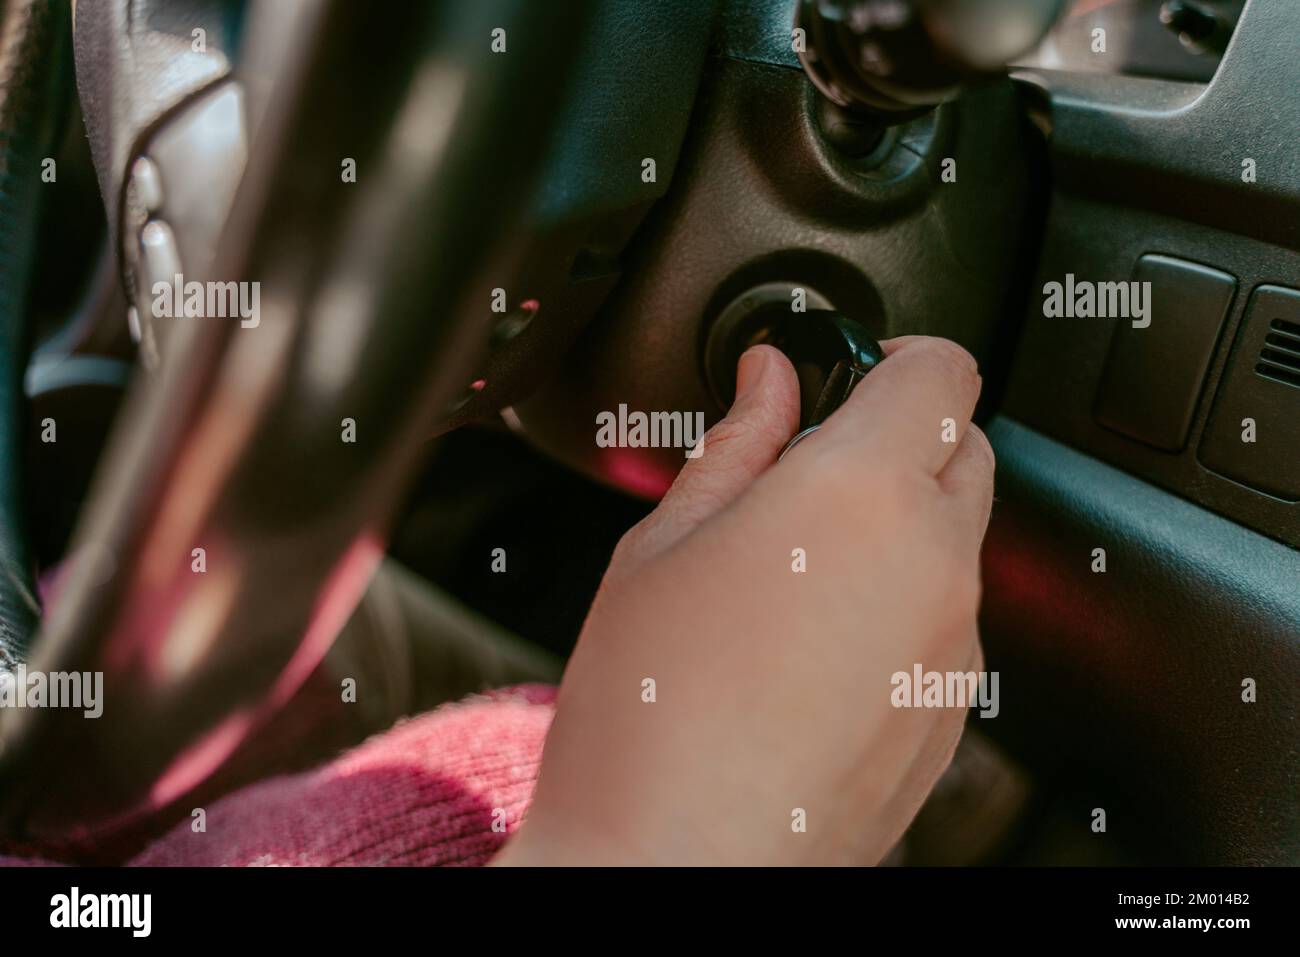 Closeup of a chauffeur seated at the car steering wheel turning the key in the ignition switch. Stock Photo